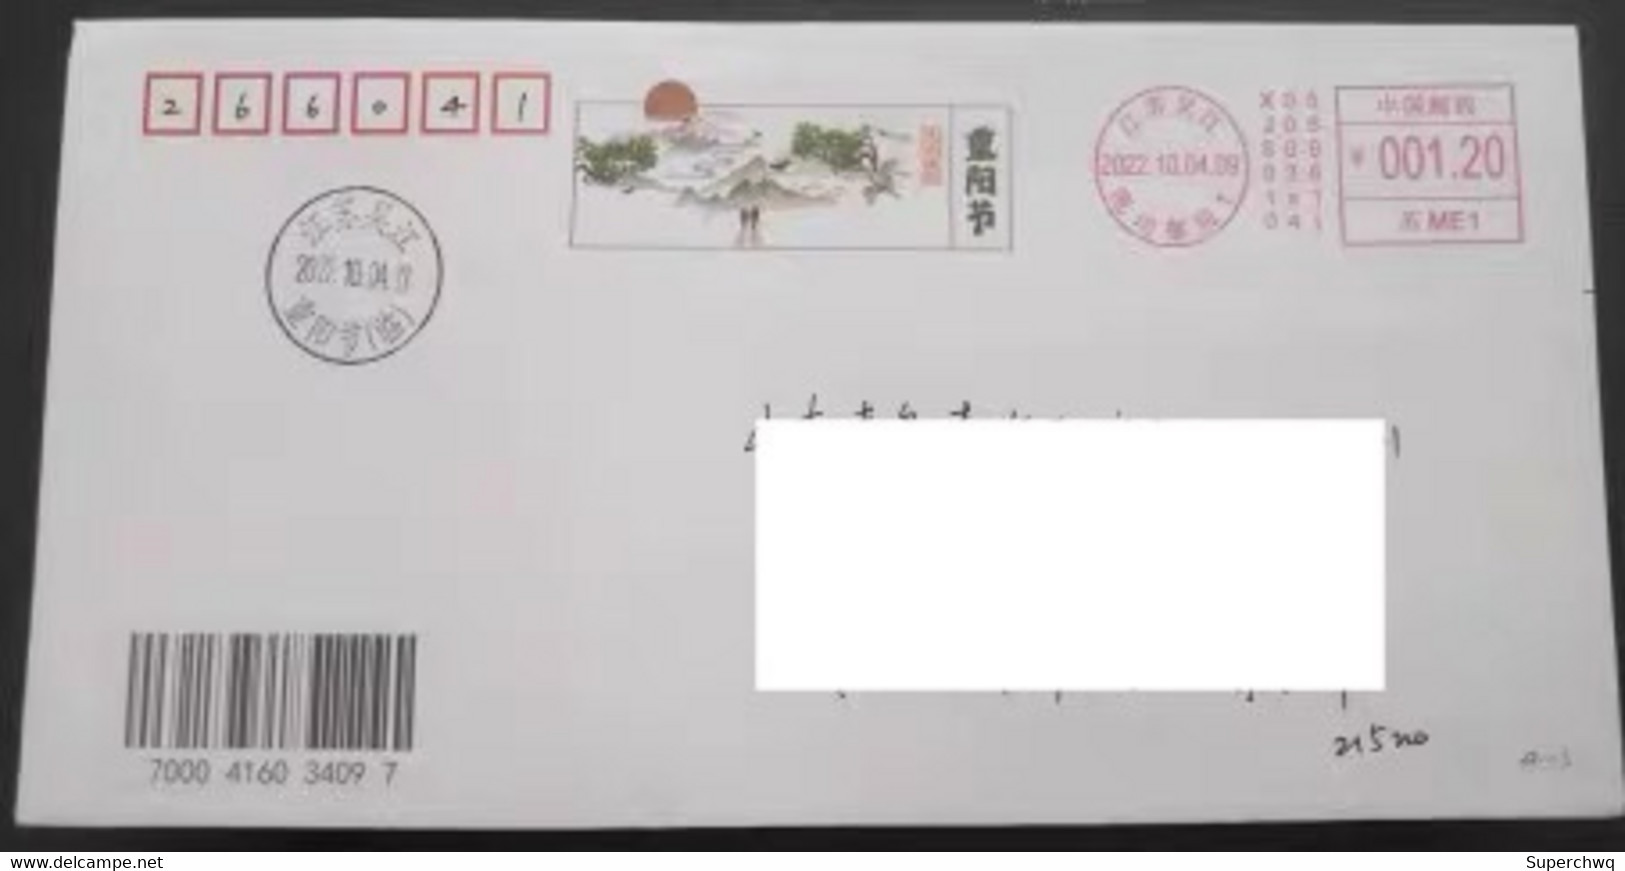 China Covers,The First Day Of The 2022 Double Ninth Festival (Wujiang, Jiangsu) With Color Postage Machine Stamp - Used Stamps